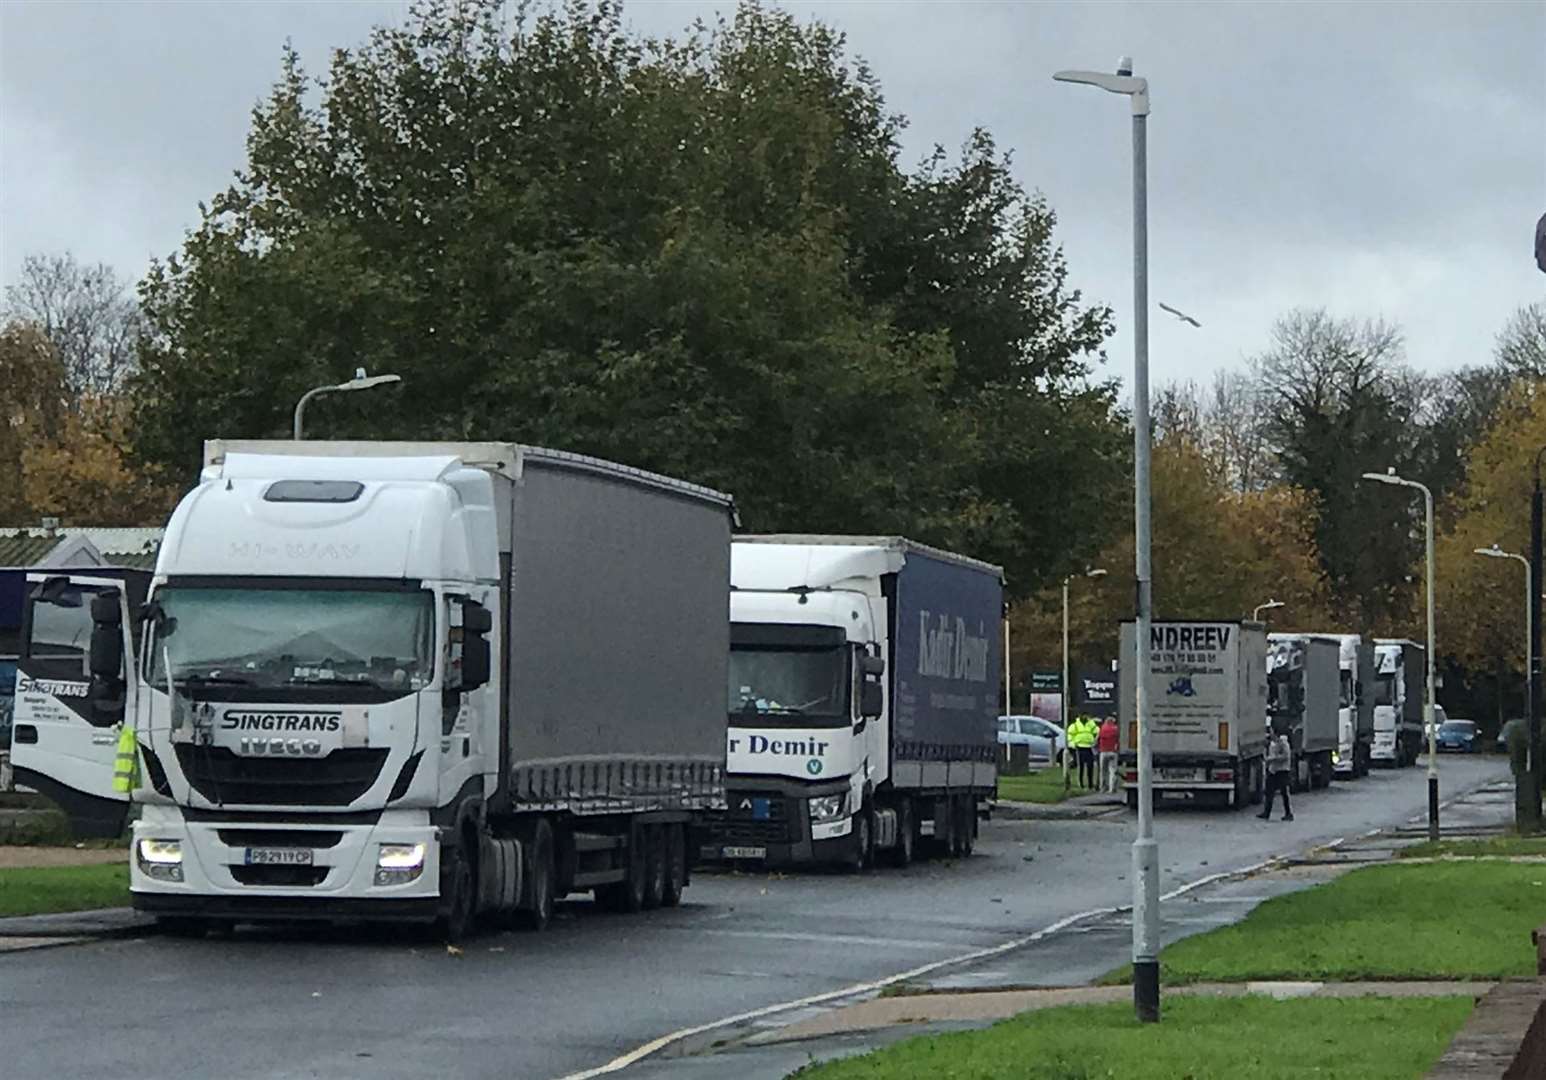 HGVs parked up end-to-end on the industrial estate